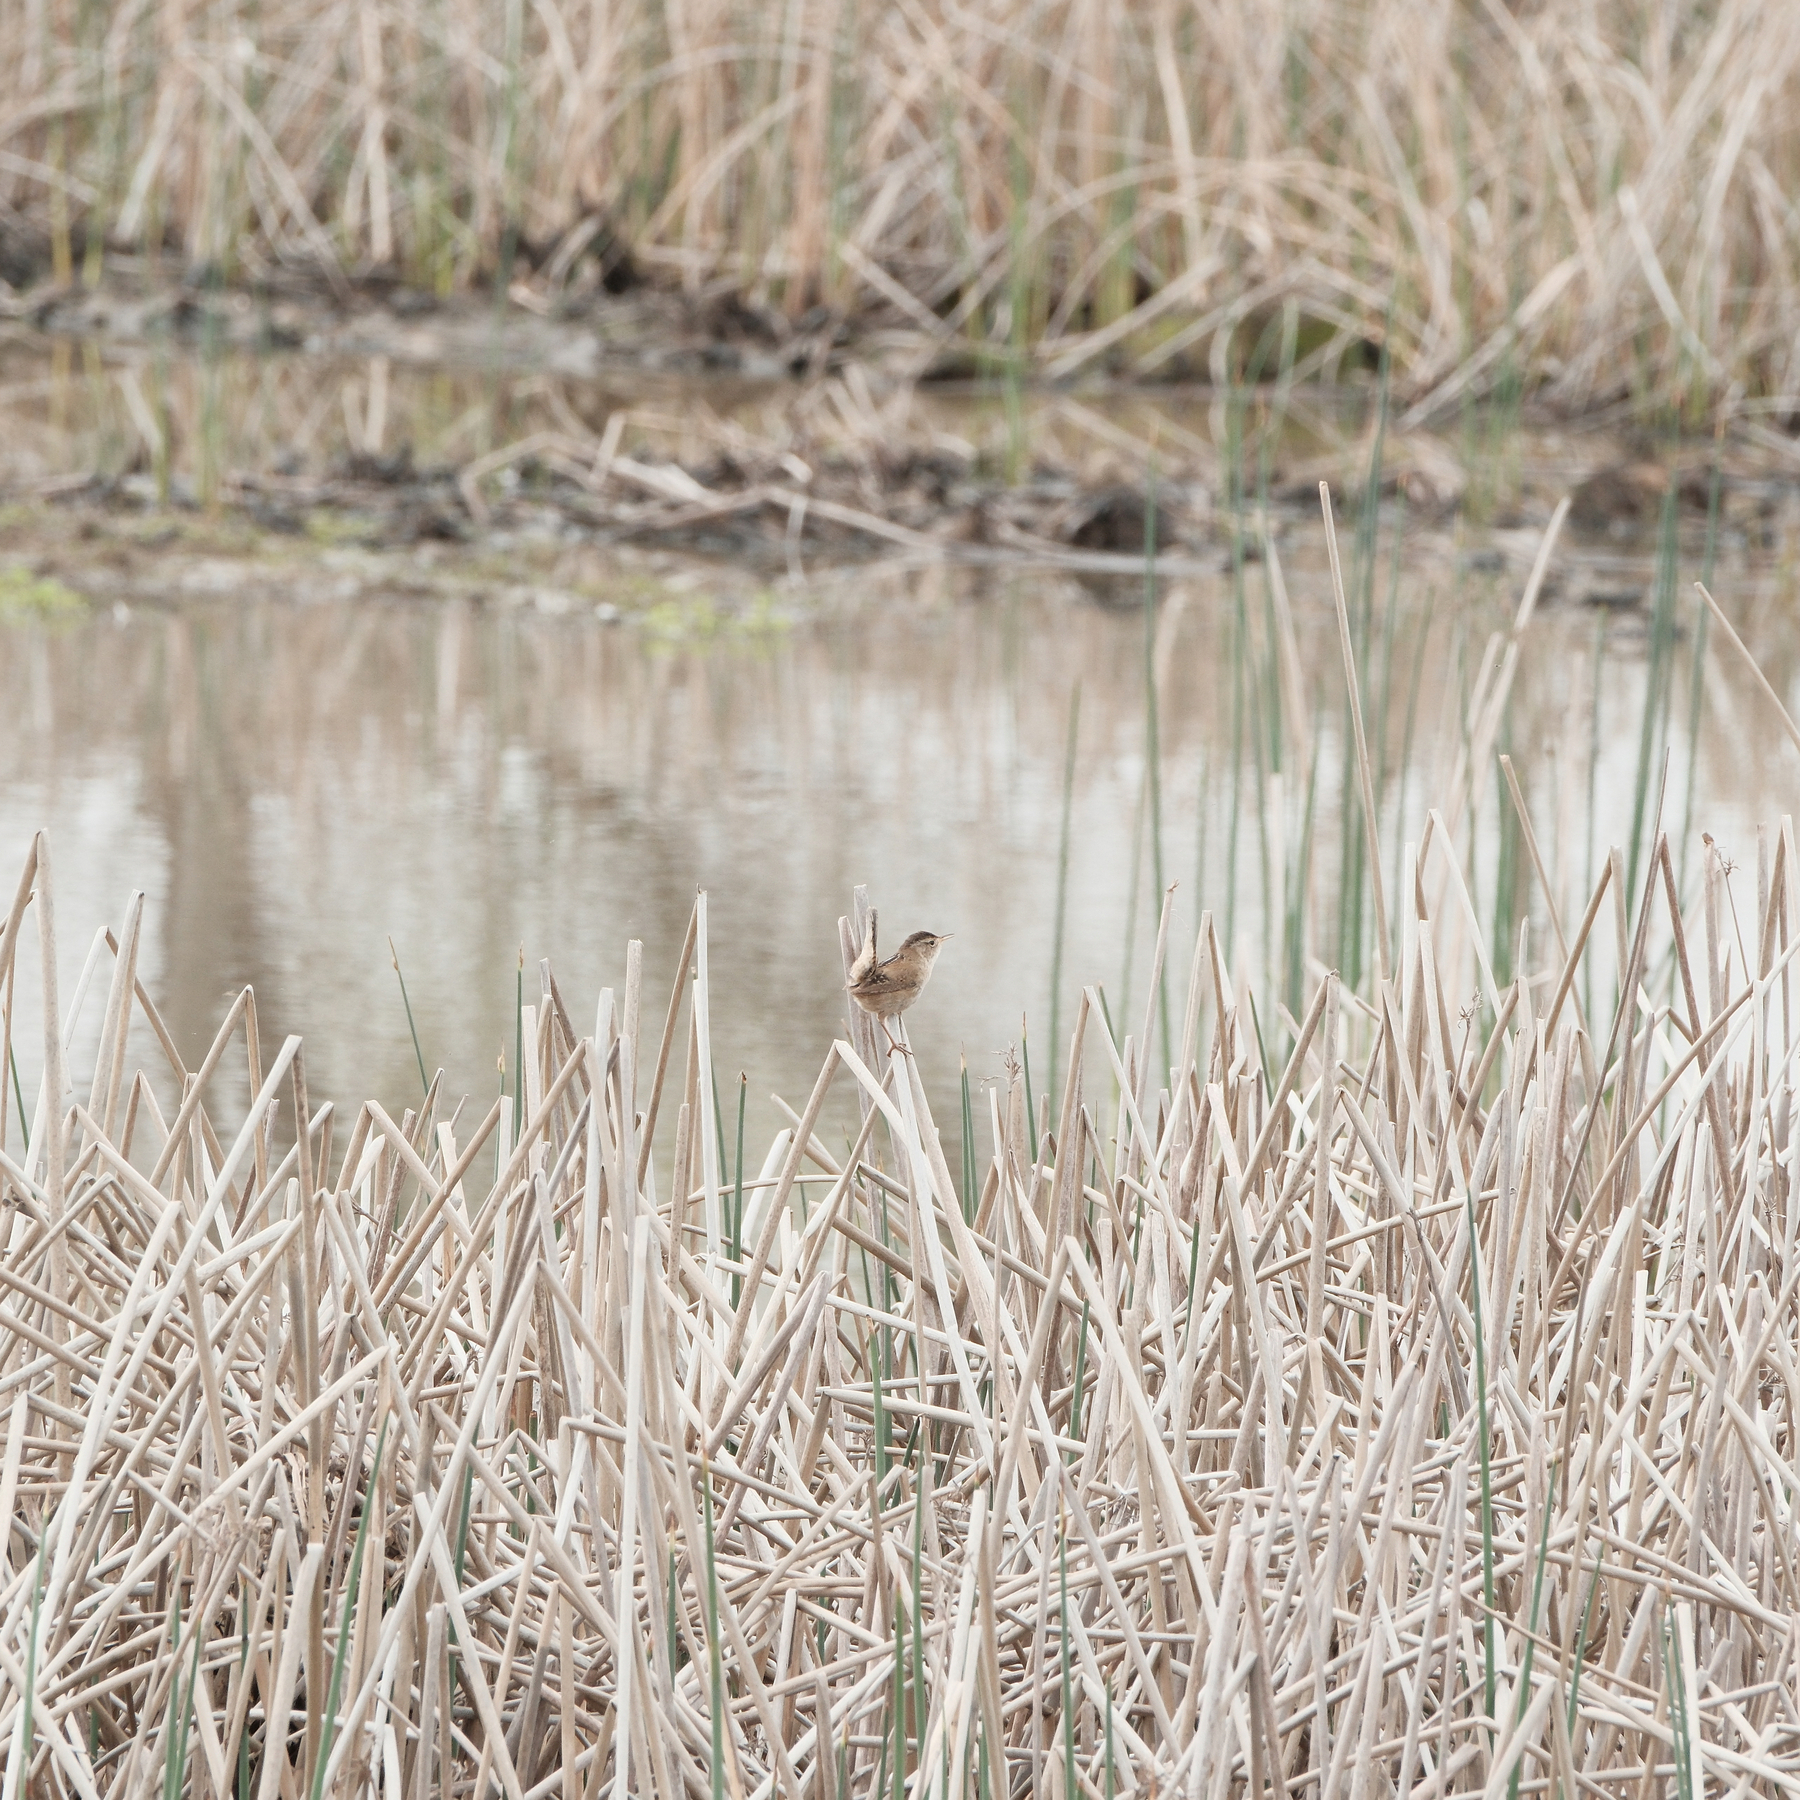 A brown Marsh Wren is perched along the top of a brown reed among a field of reeds. Its tail is pointing straight up! There are some Spring fresh green reeds amongst the brown reds and there’s a calm water pond behind the wren